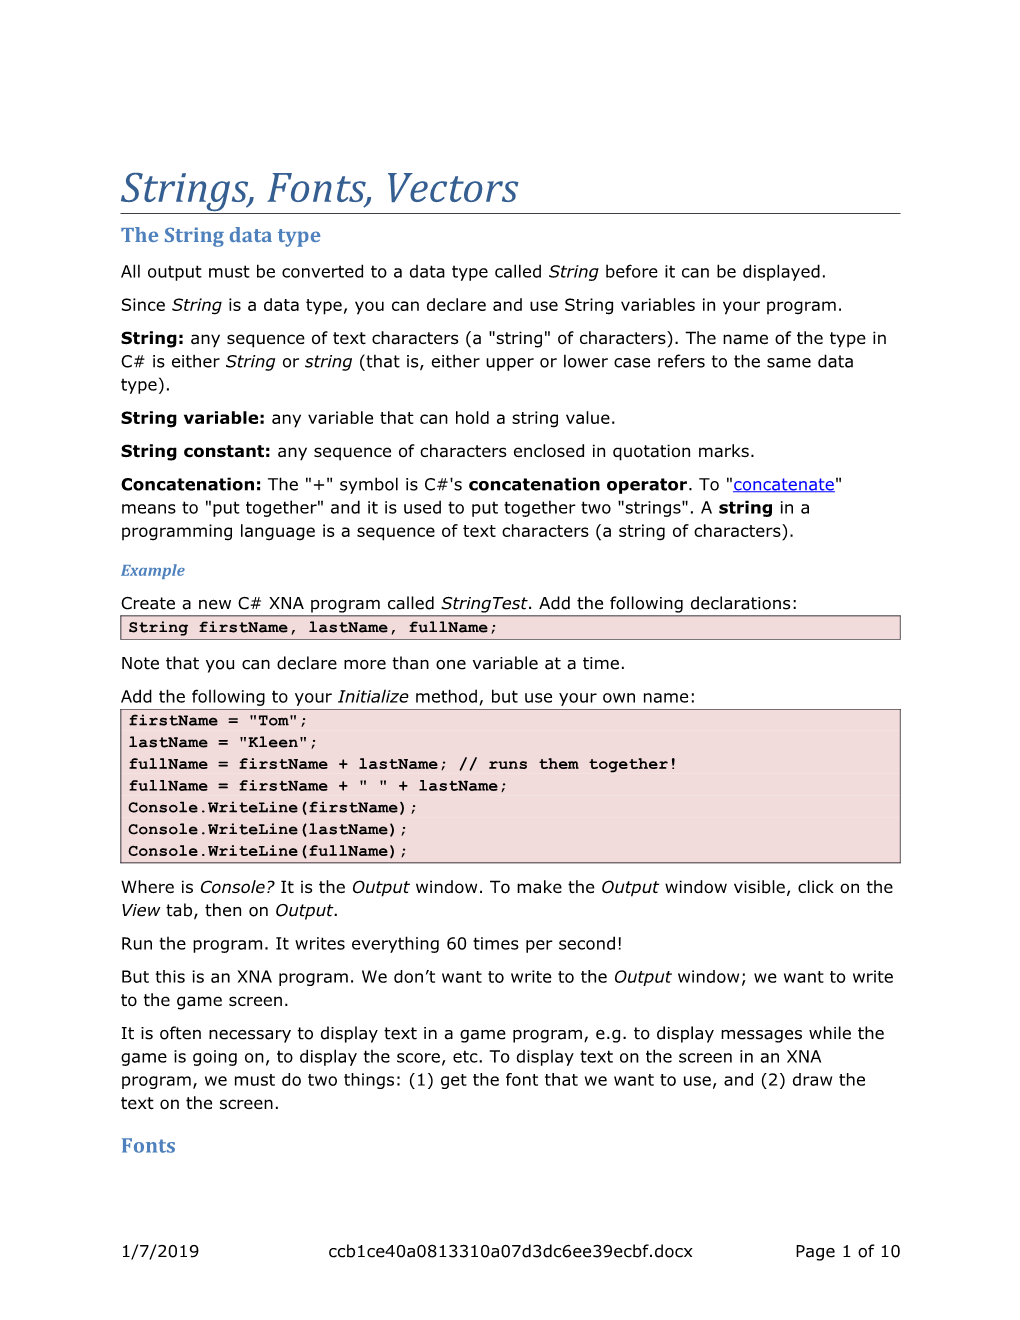 The String Data Type